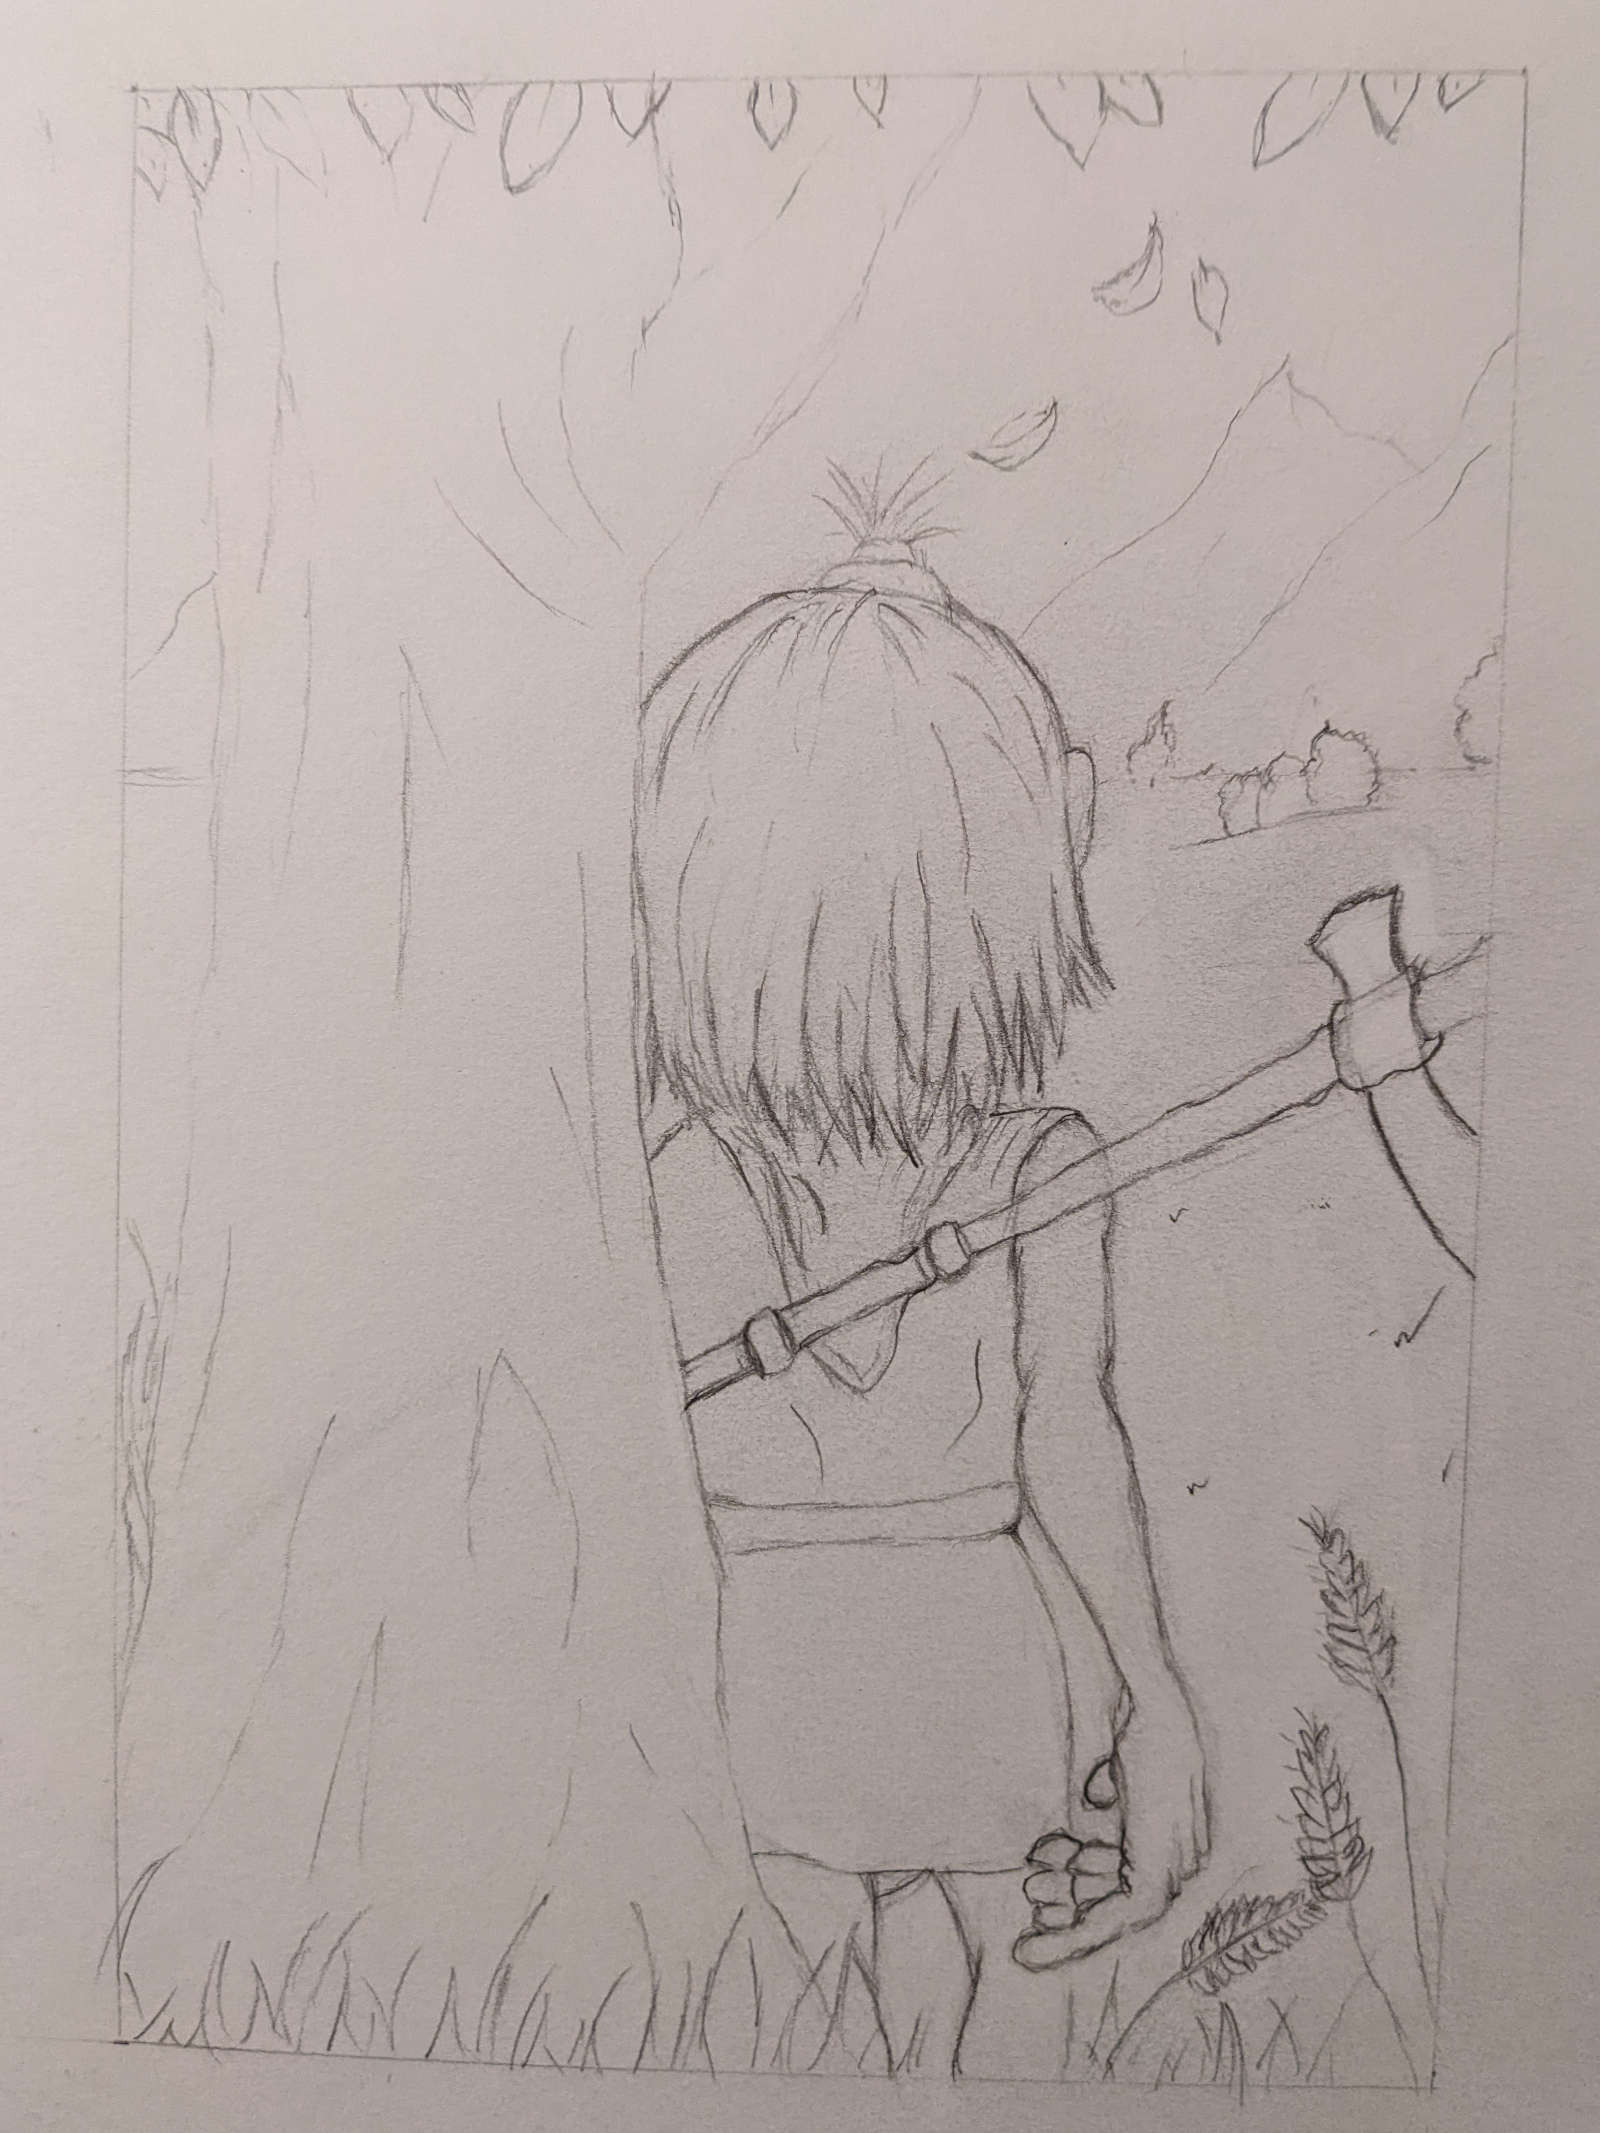 Boy standing in front of tree, looking beyond a field of grass toward mountains. Pencil sketch.